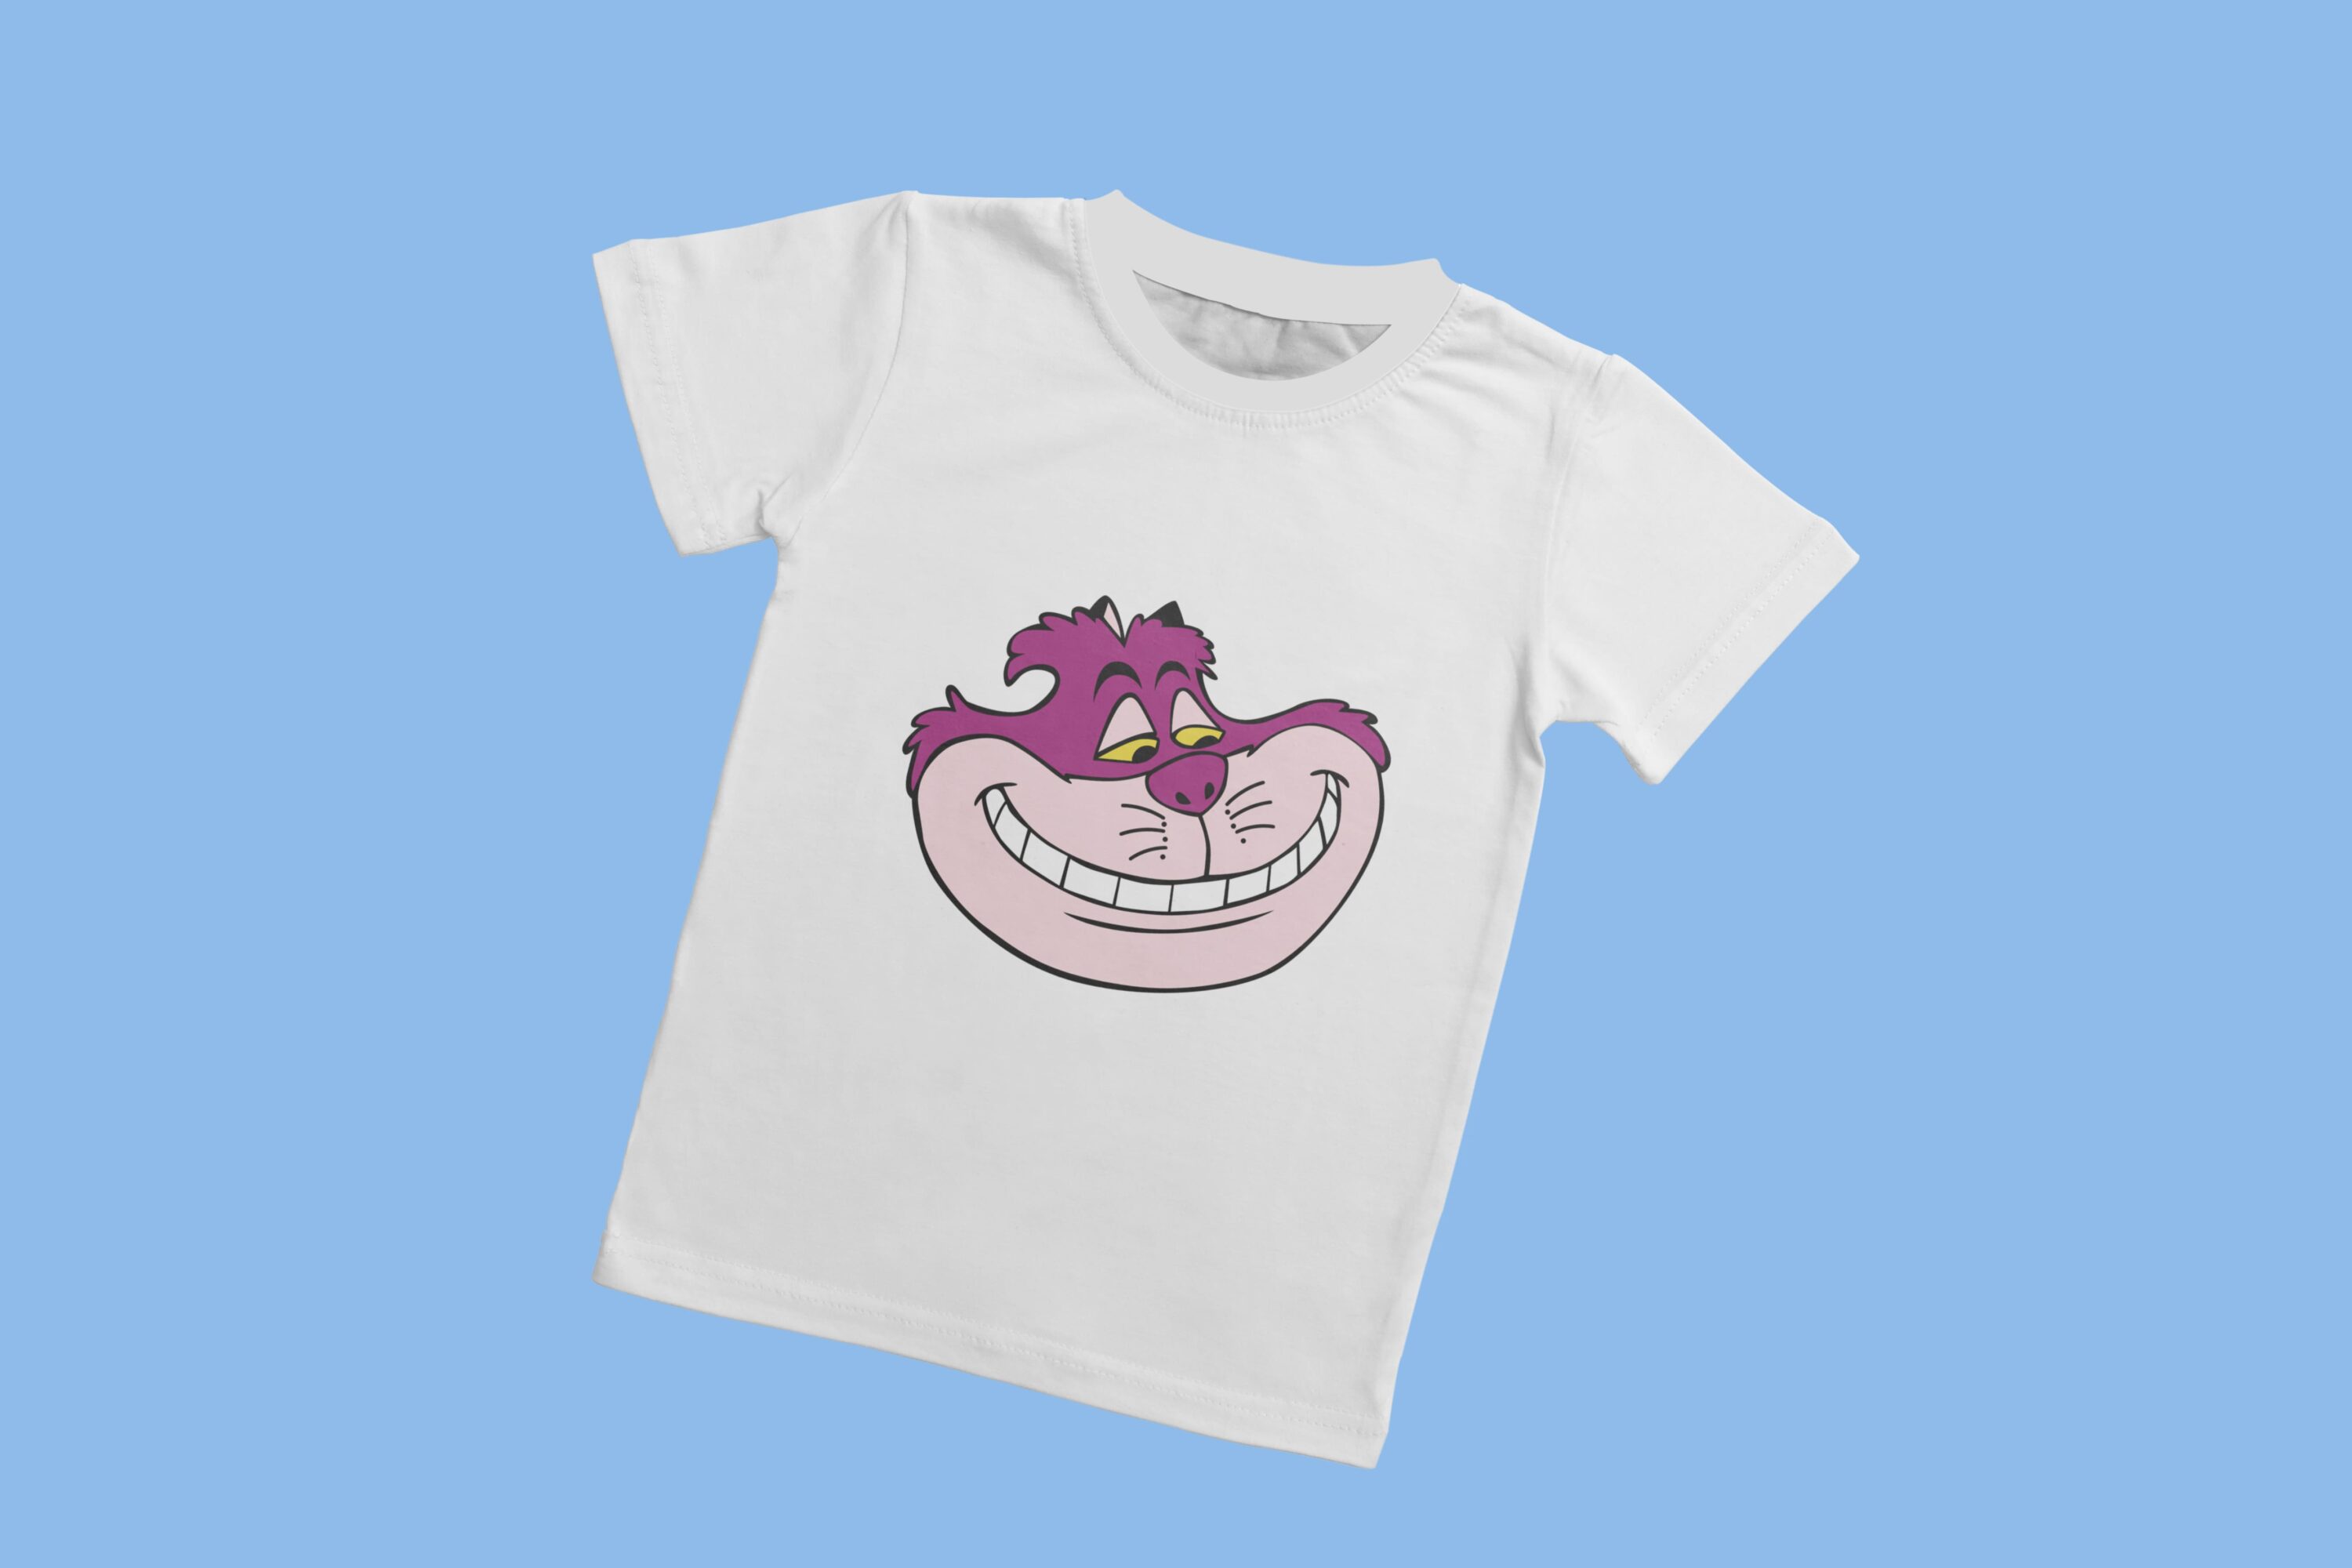 A white t-shirt with a white collar and the face of a smiling Cheshire cat on a blue background.